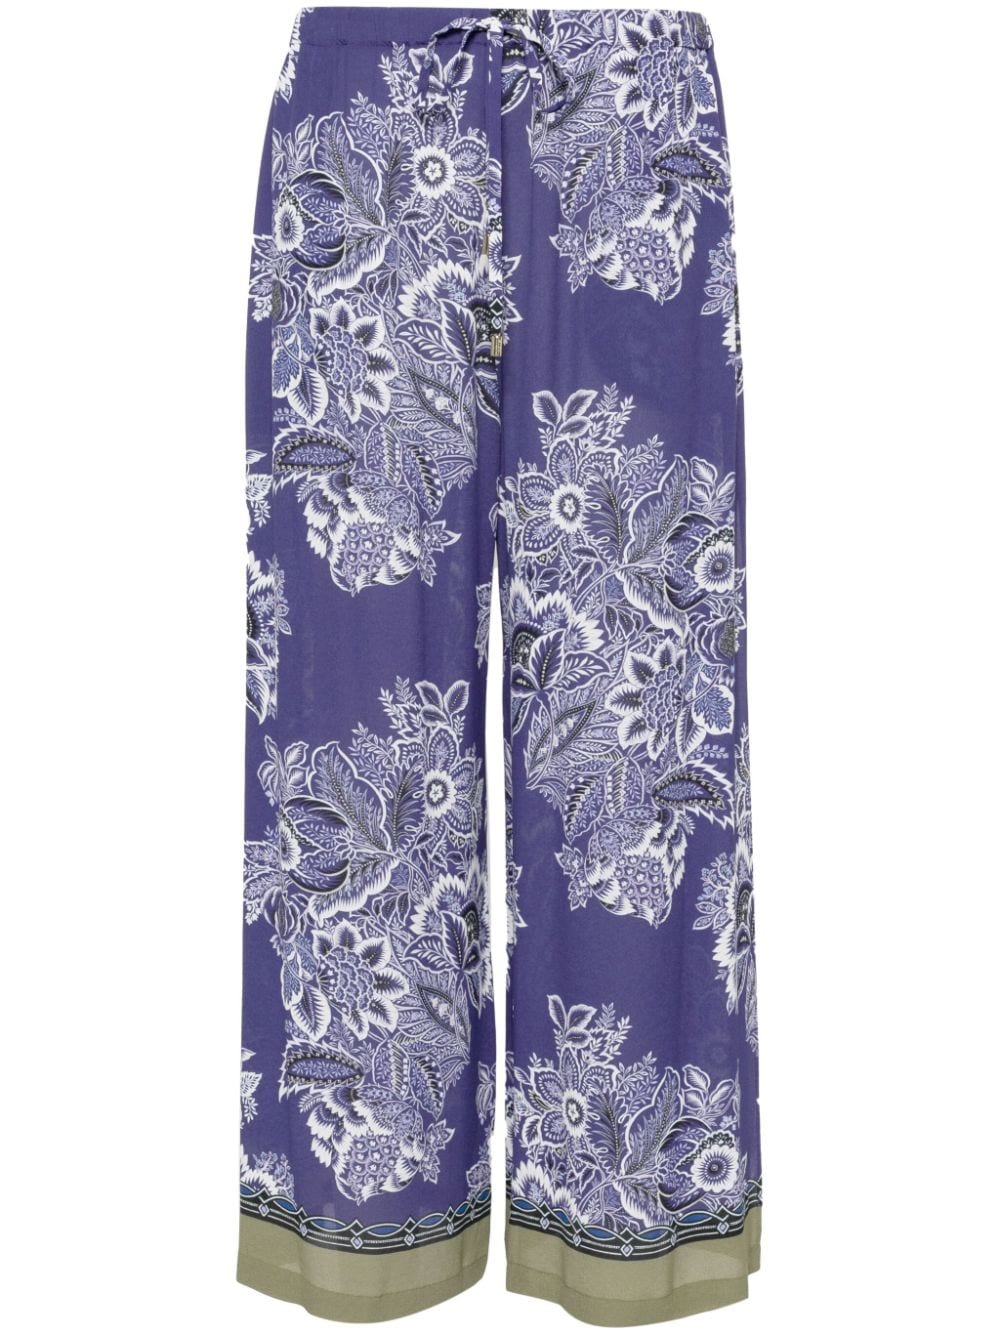 ETRO Playful Blue Floral Pants for Women - Seasonal Must-Have